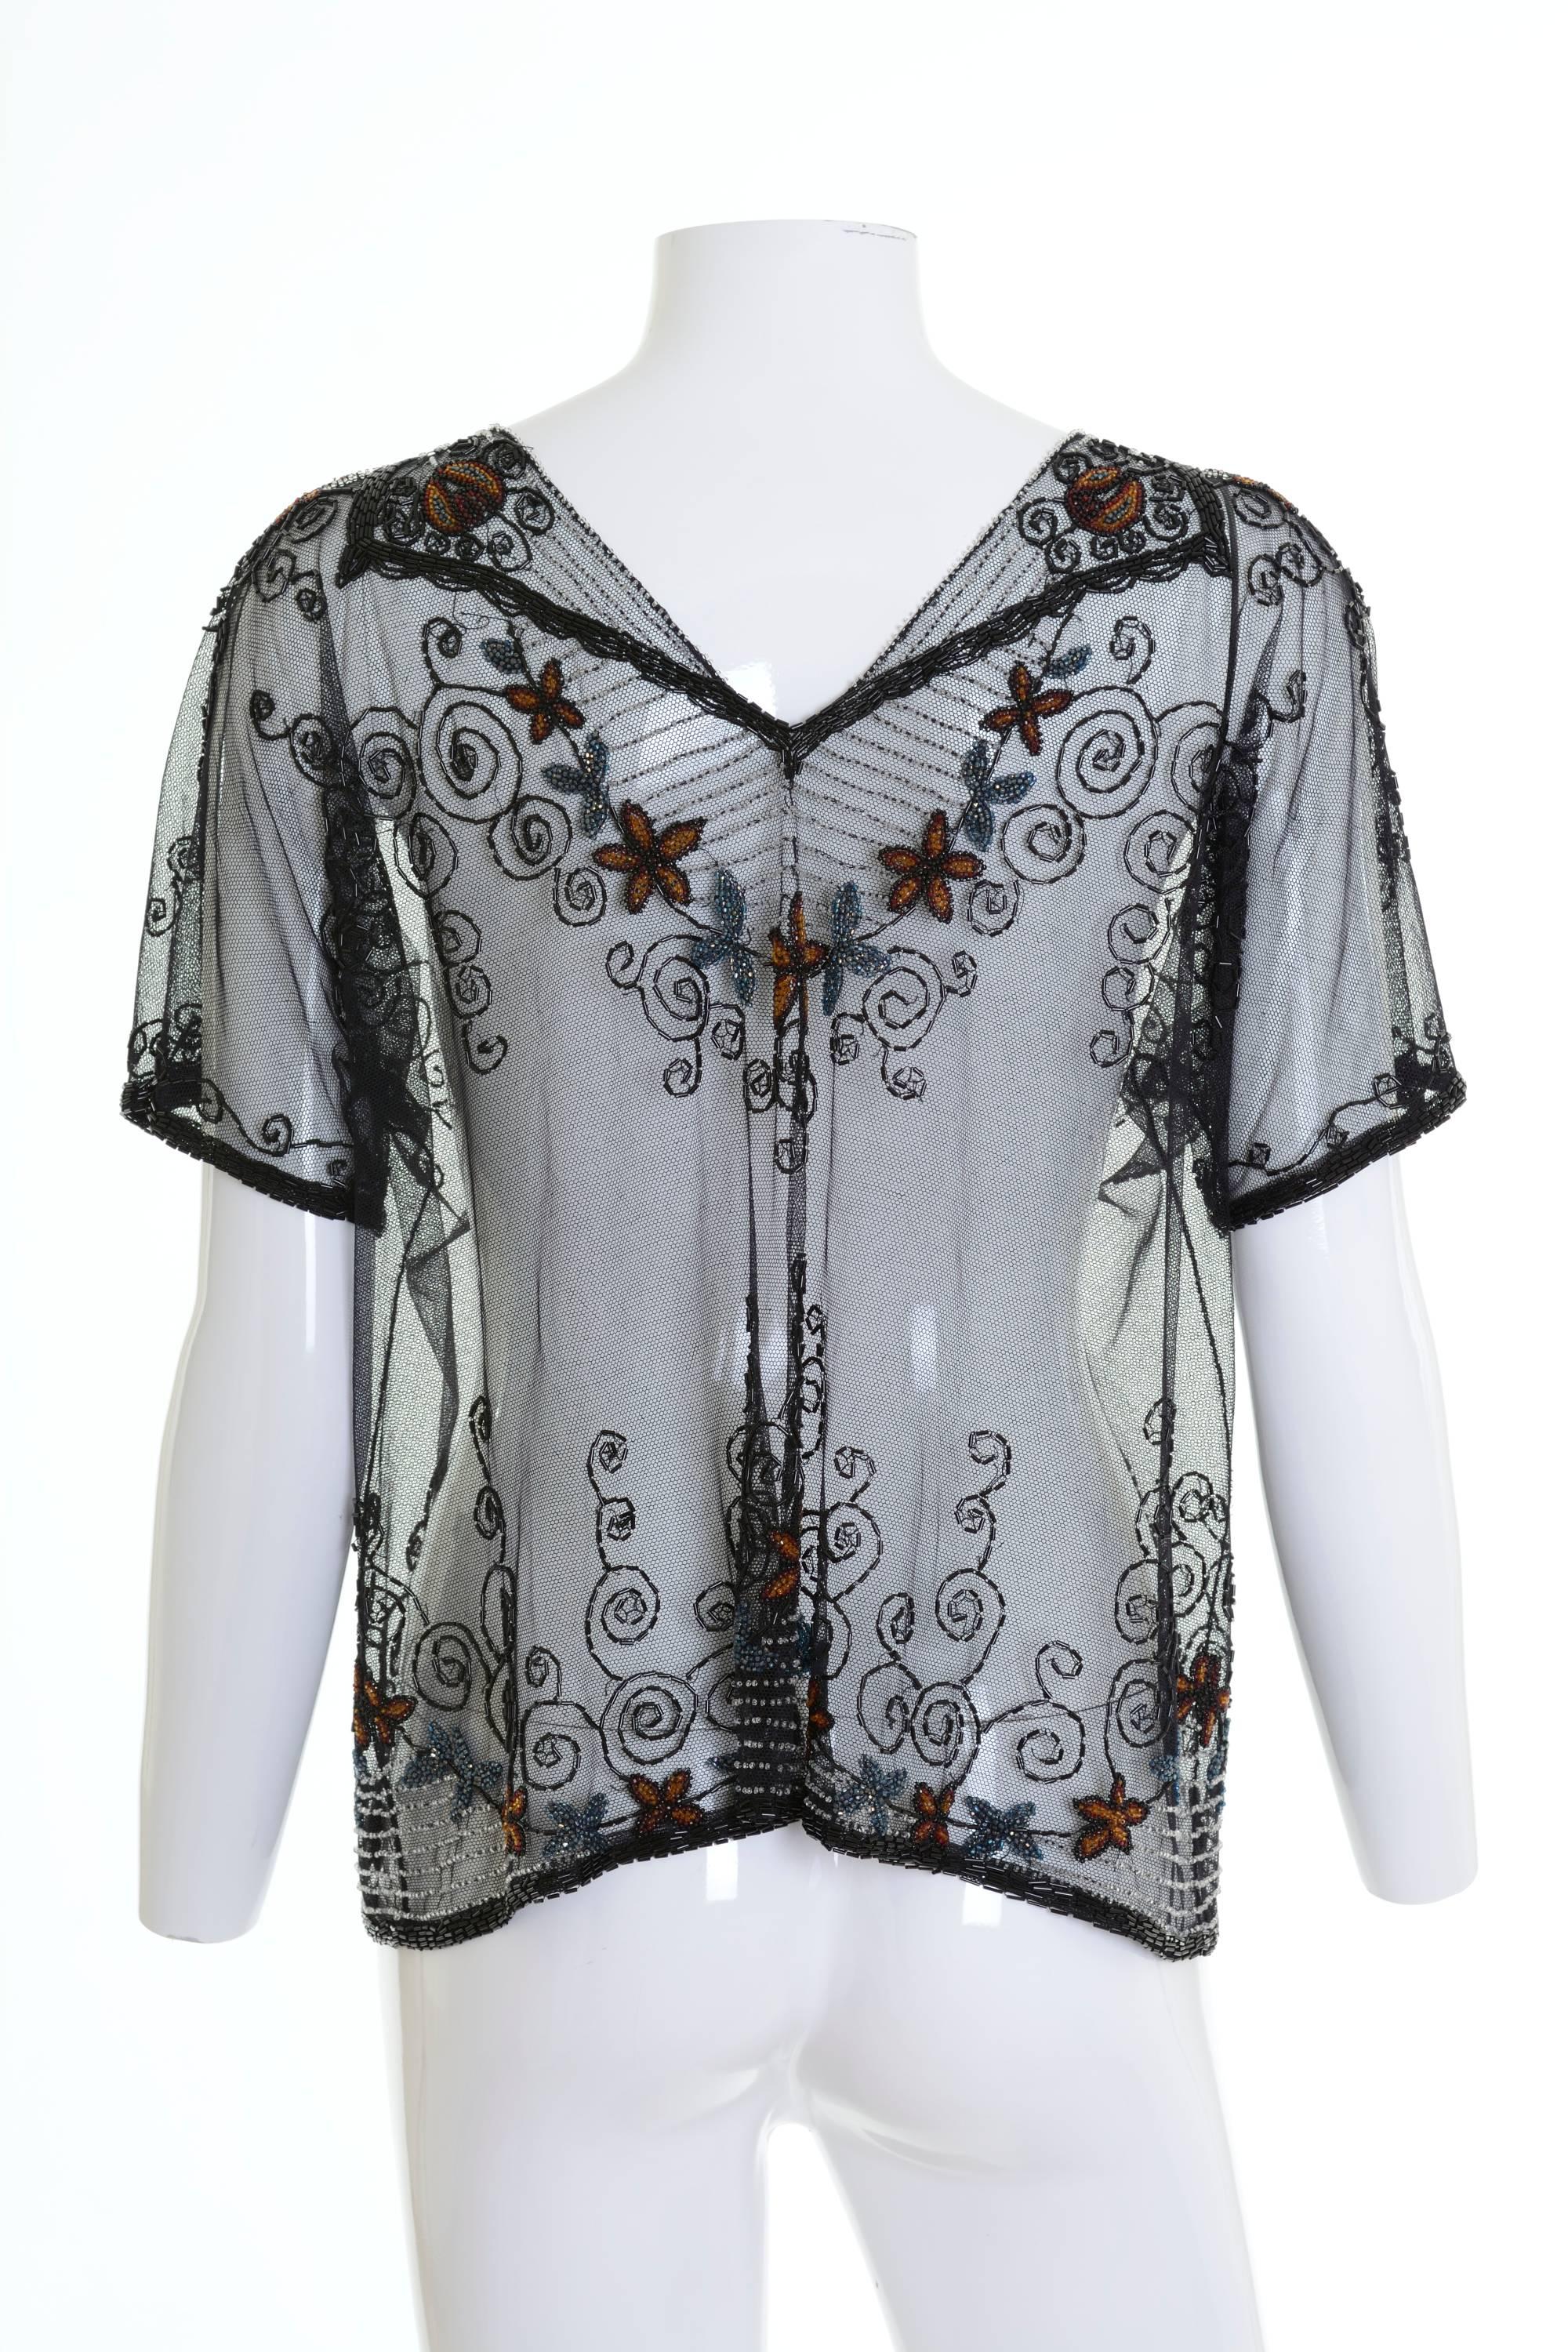 This amazing handmade 1920s blouse shirt is in a fabulous sheer tulle fabric with glass beadeds embroidered details. It has cap sleeves and straight line.

Excellent vintage condition

Label: N/A
Fabric: silk
Color: black

Measurement:
Estimated